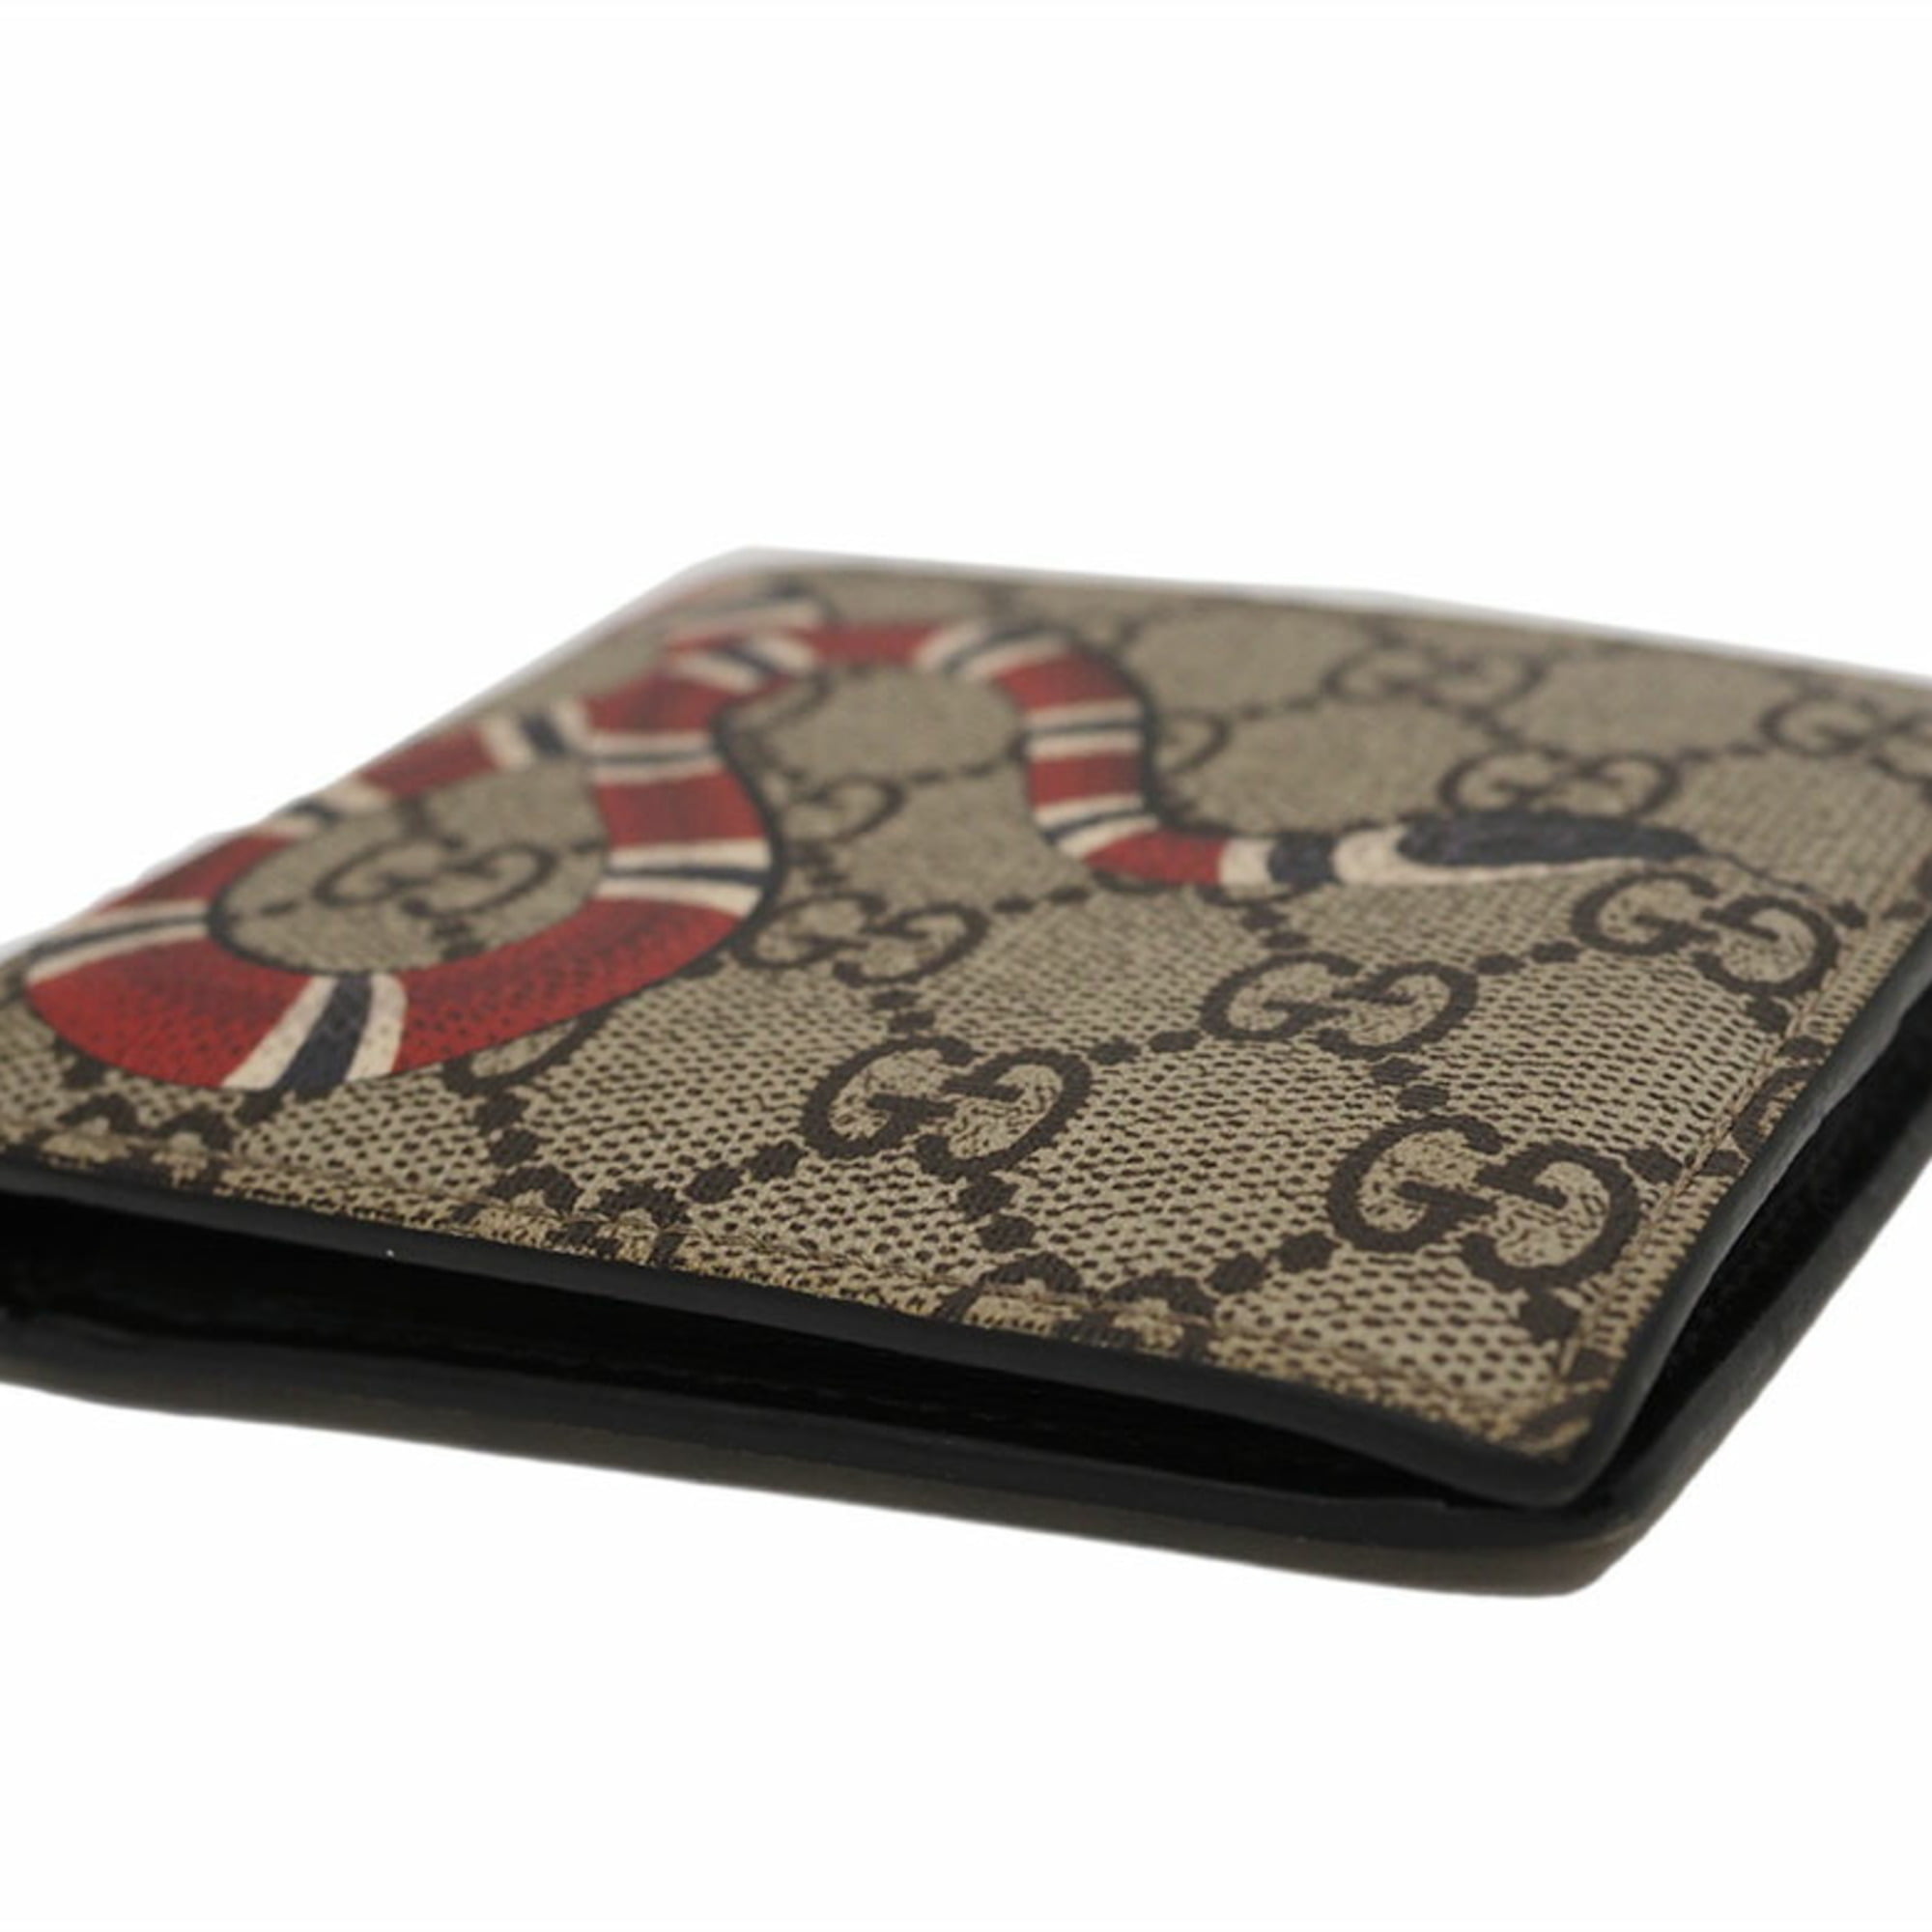 Authentic Snake Print Gucci Wallet for Sale in Fort Worth, TX